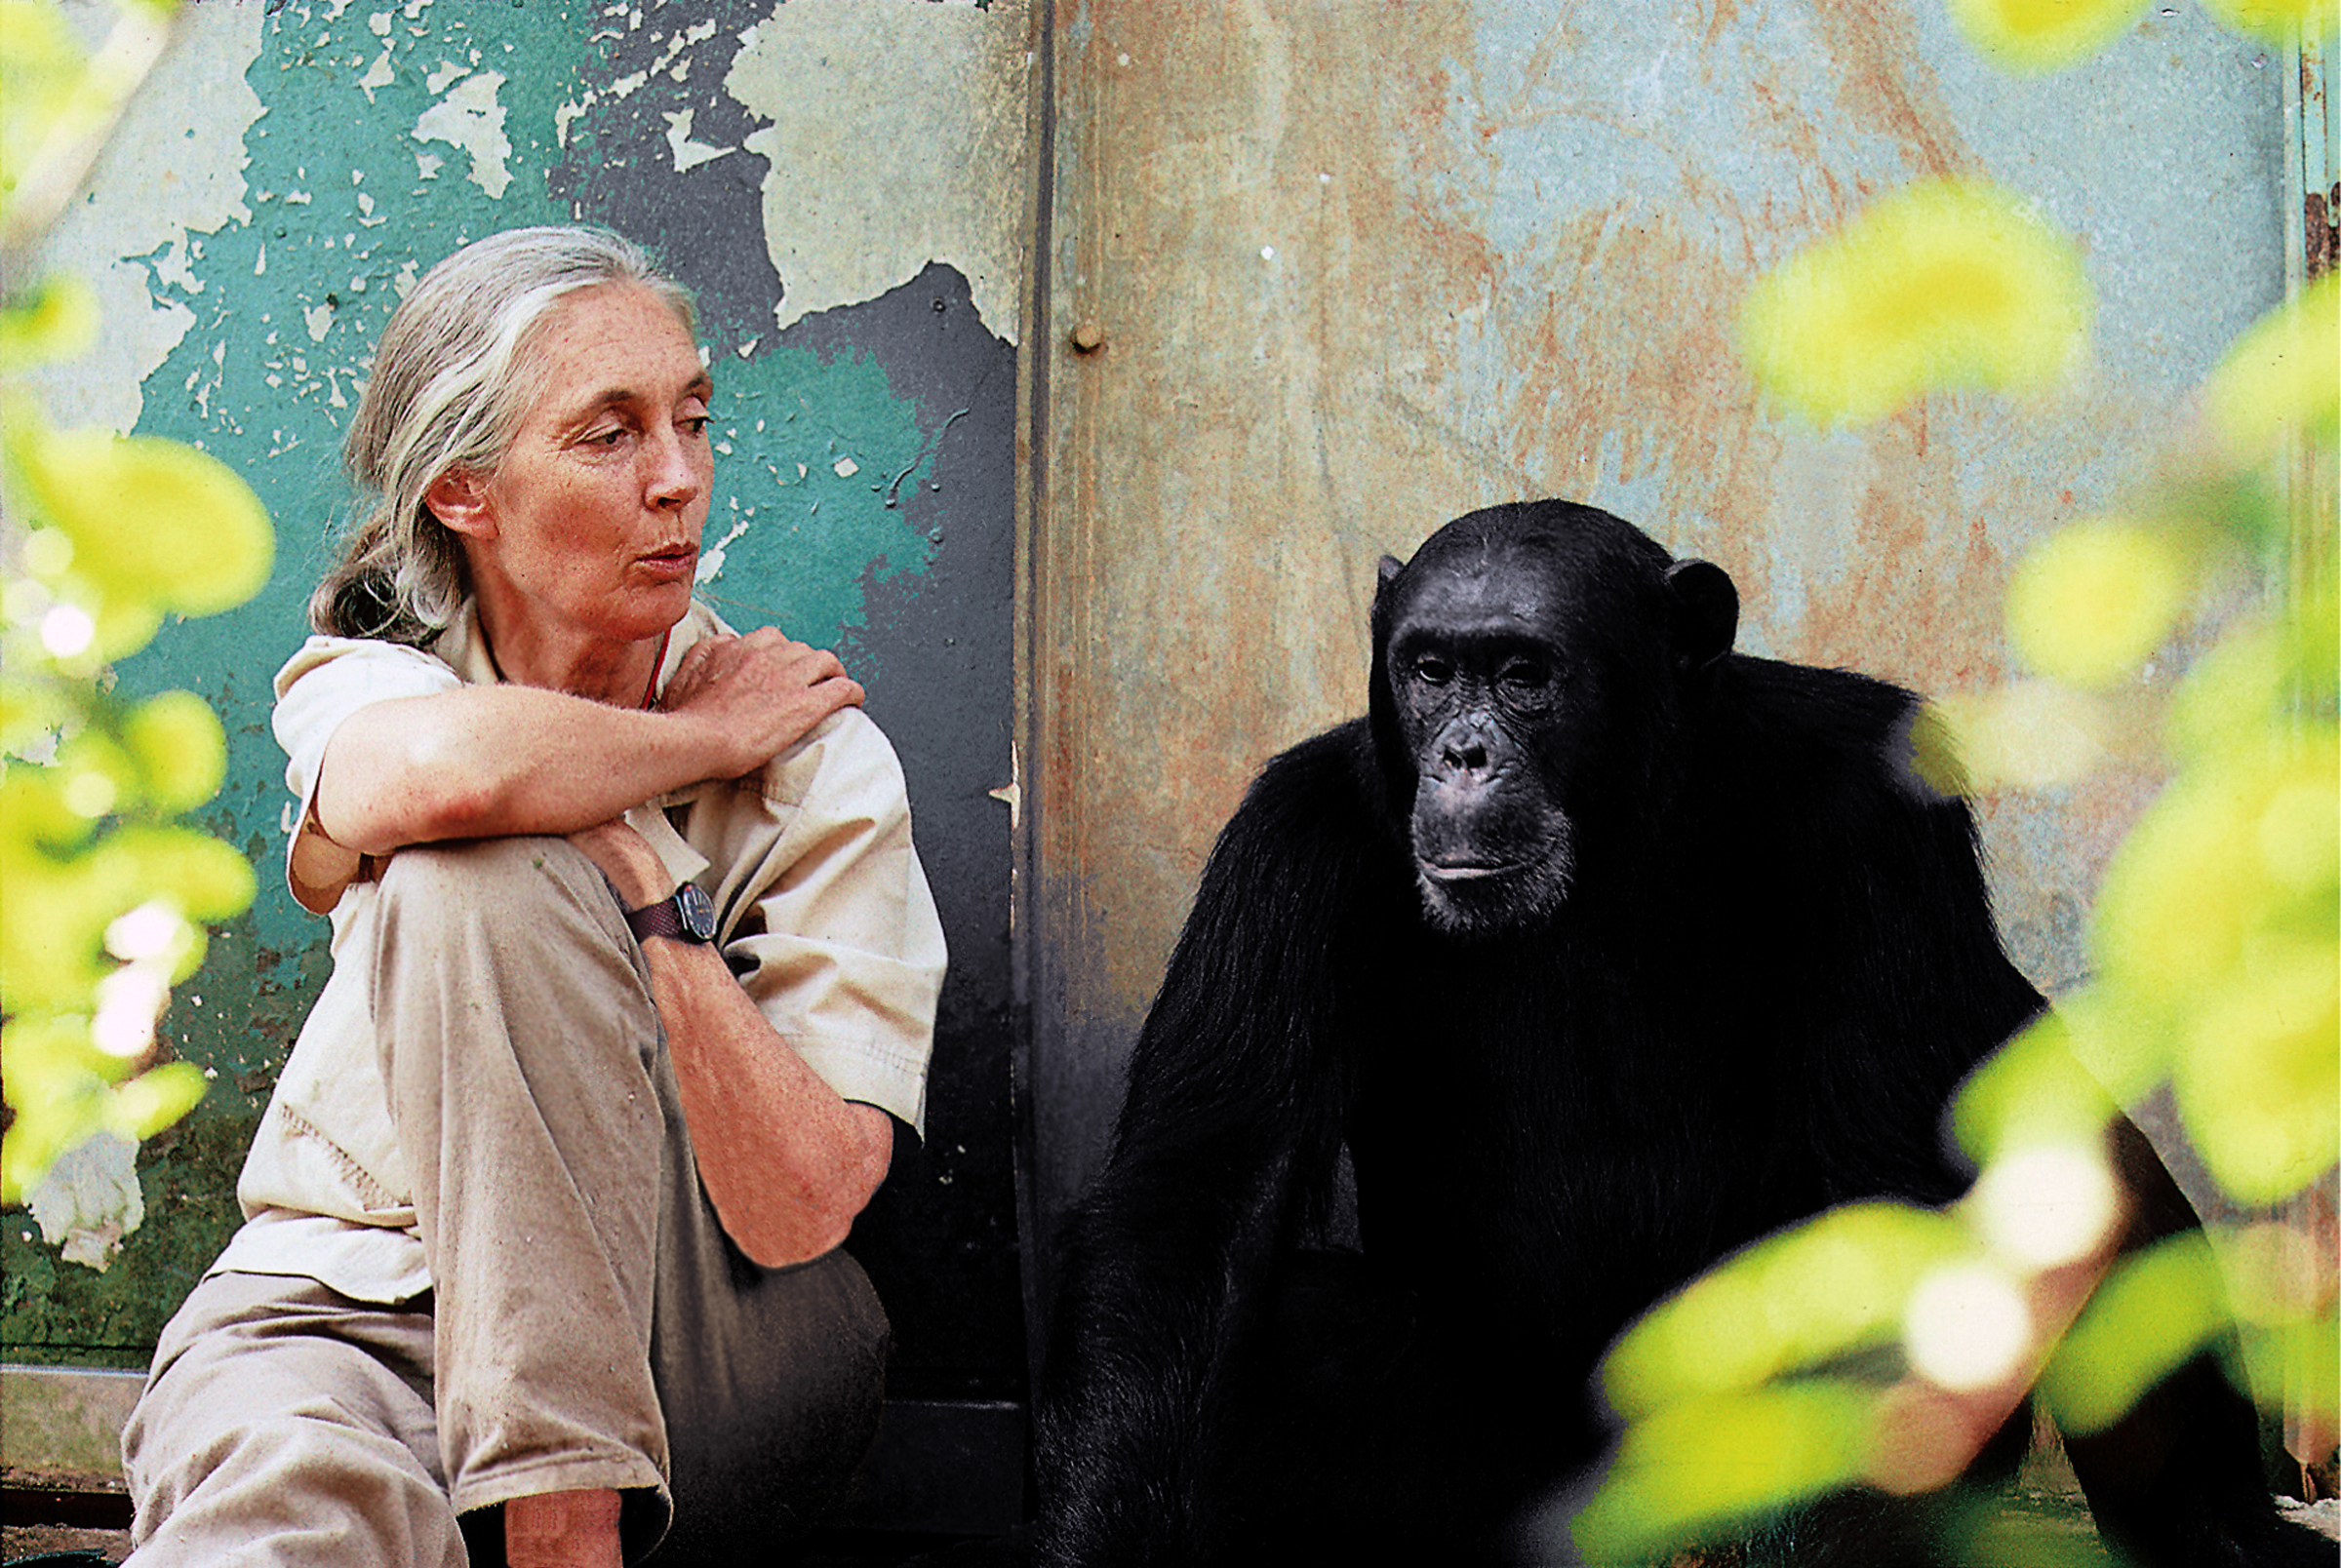 Jane Goodall Speaking Schedule 2022 Reasons For Hope: A Virtual Discussion With Dr. Jane Goodall | Schaefer  Center For The Performing Arts